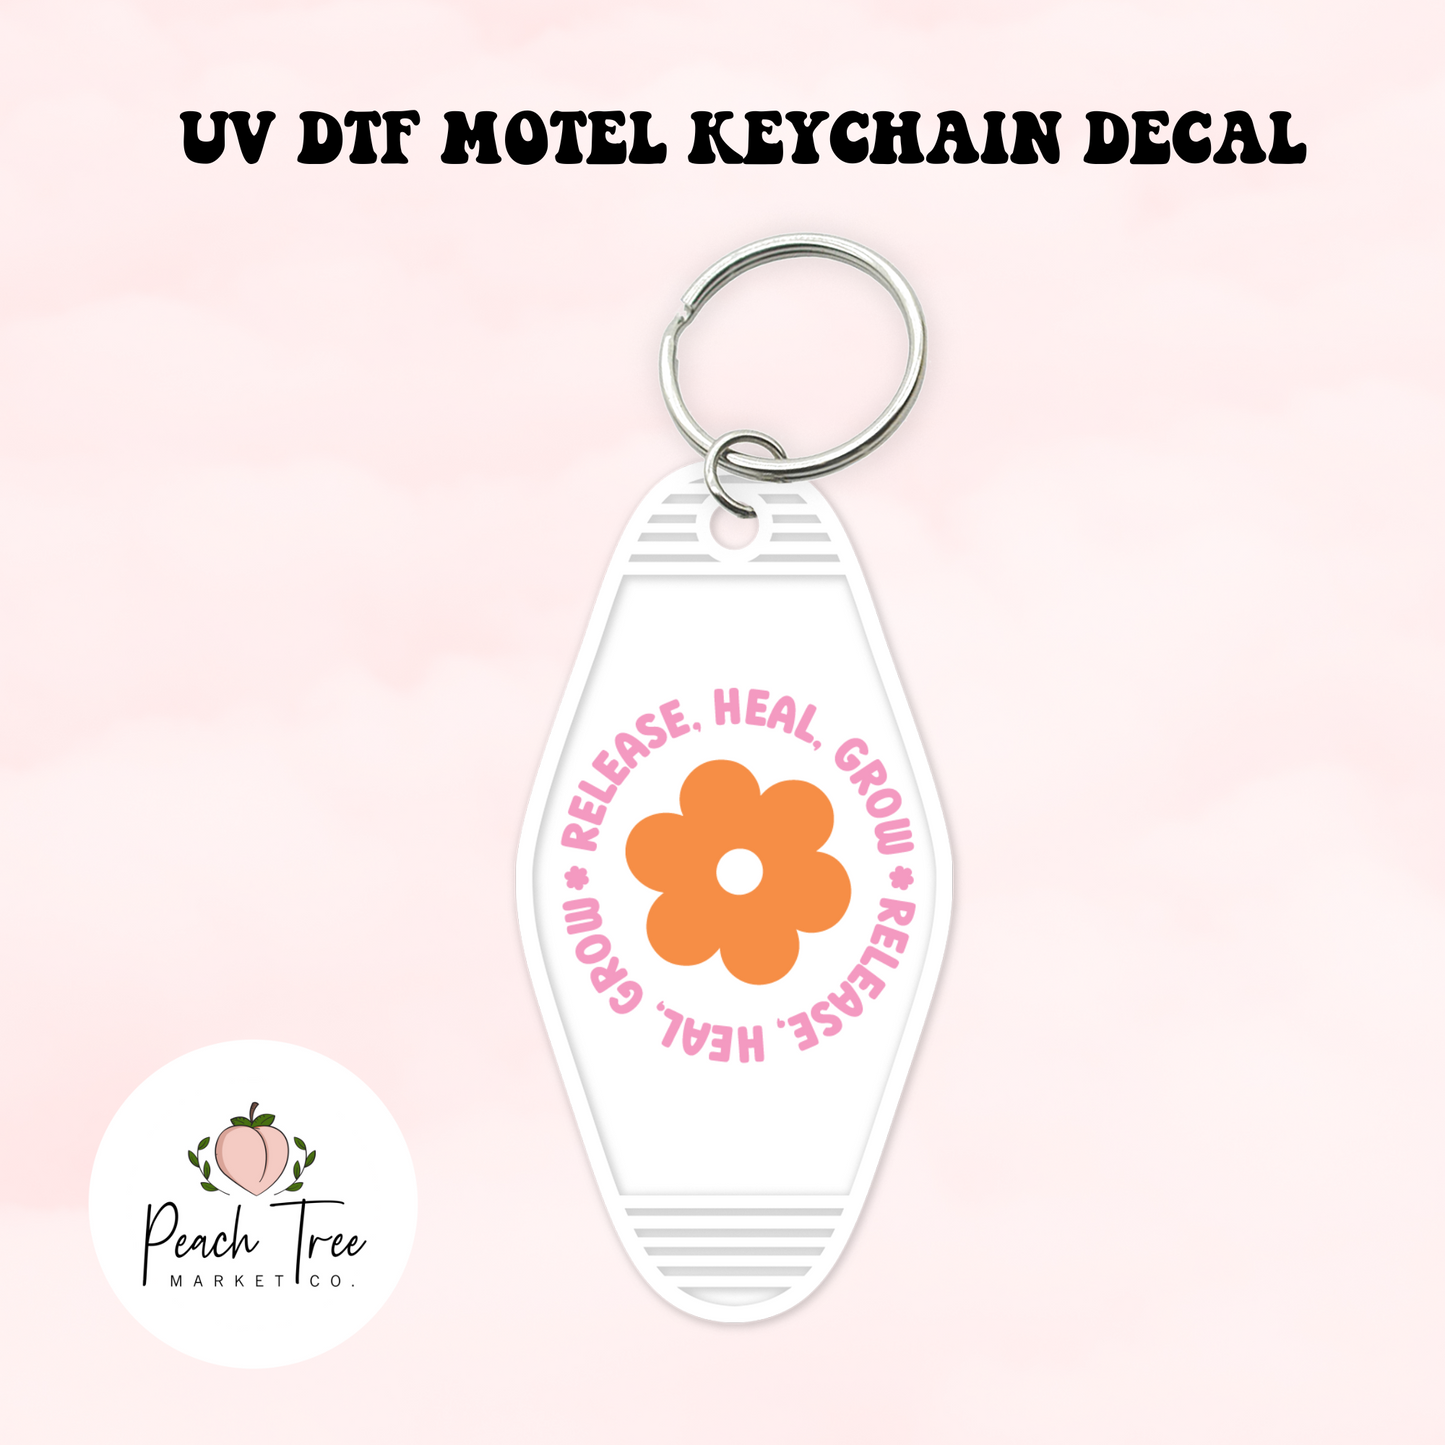 Release. Heal. Grow UV DTF Motel Keychain Decal